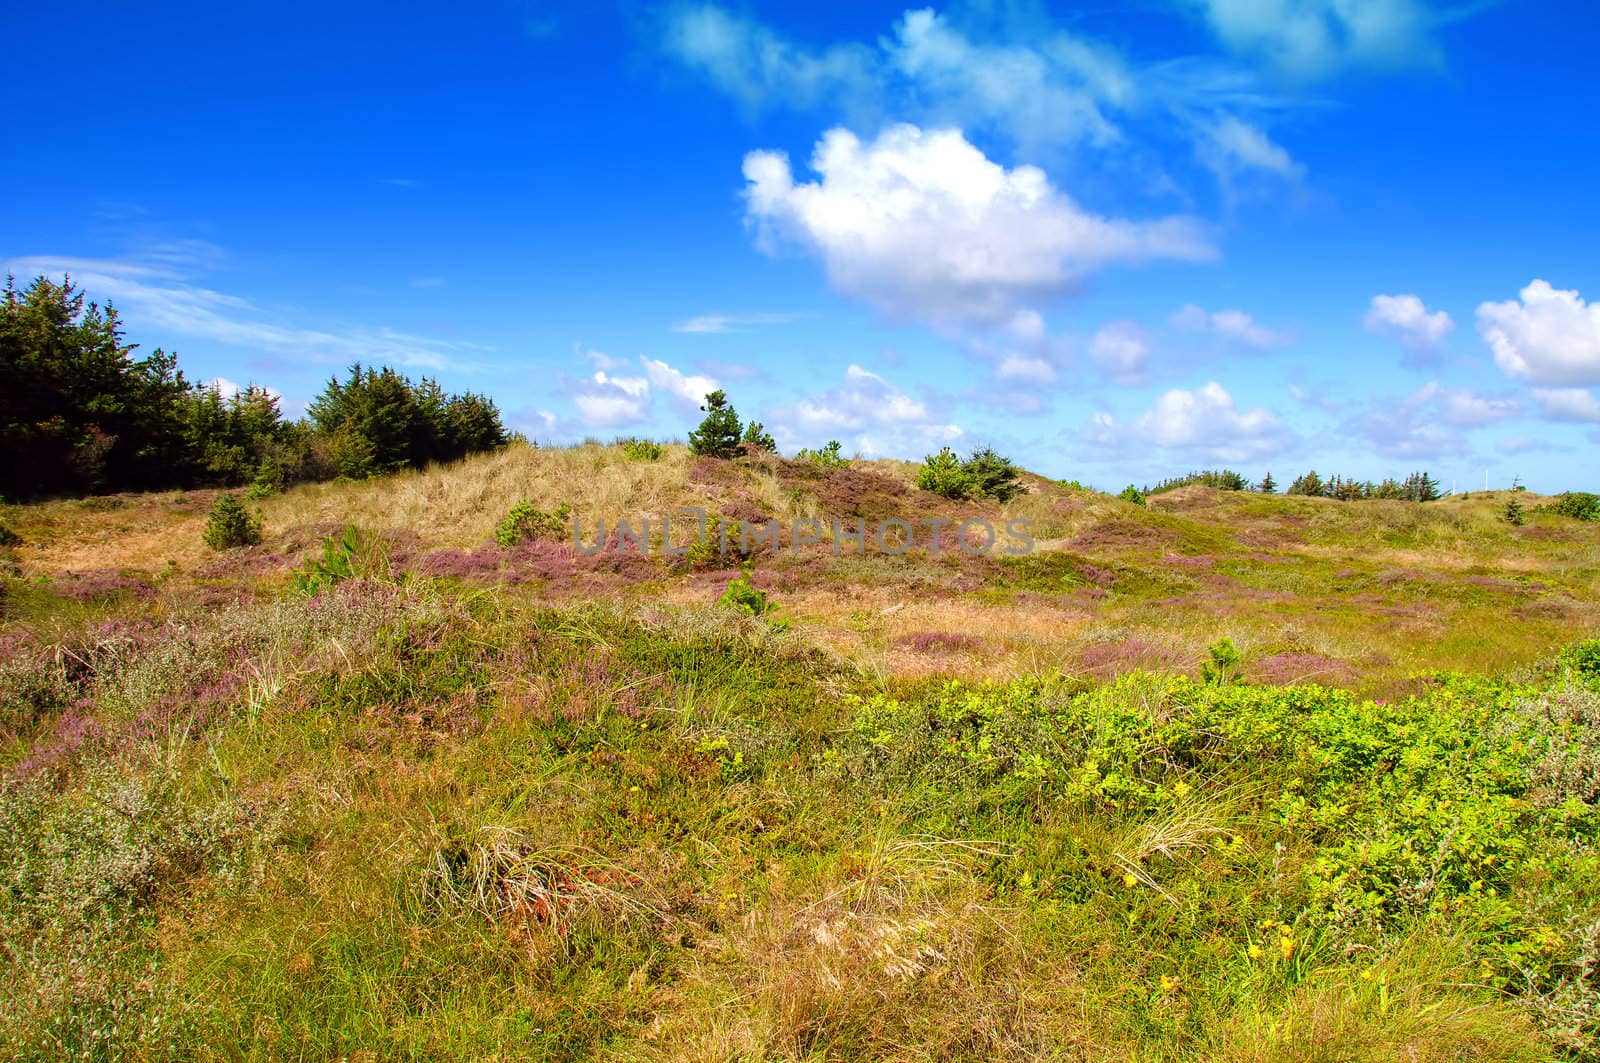 A hill on the moors with blooming heather, blue sky and white clouds